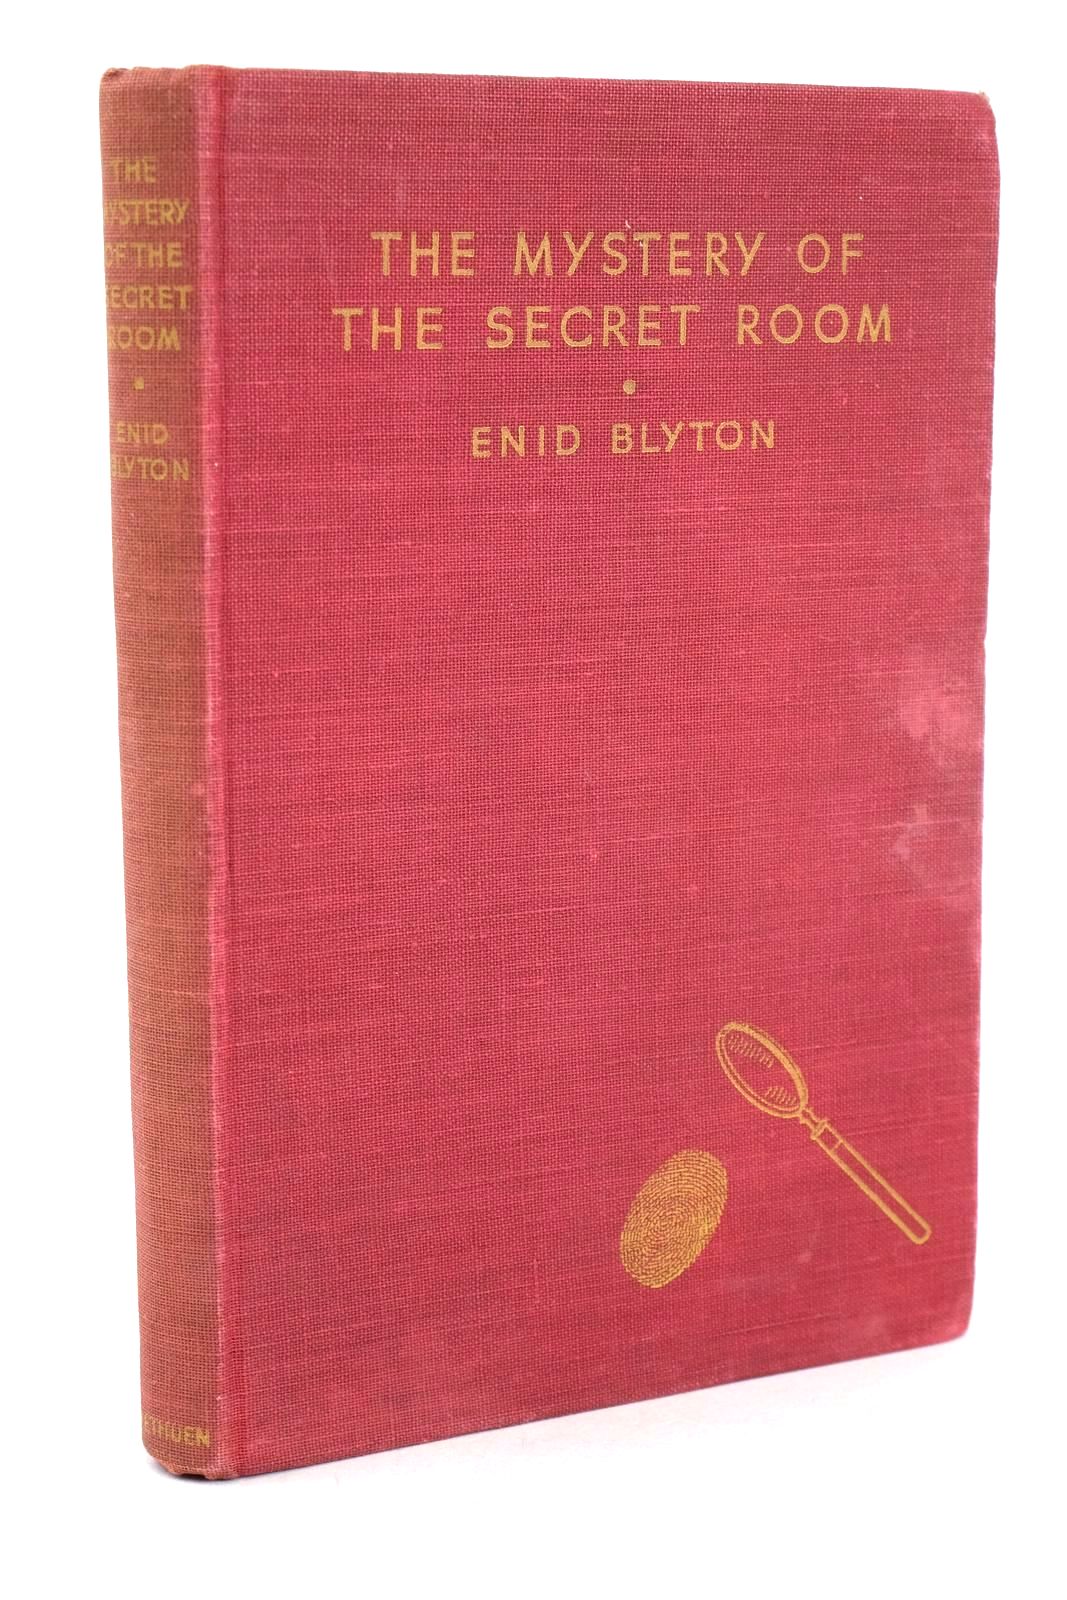 Photo of THE MYSTERY OF THE SECRET ROOM- Stock Number: 1326915